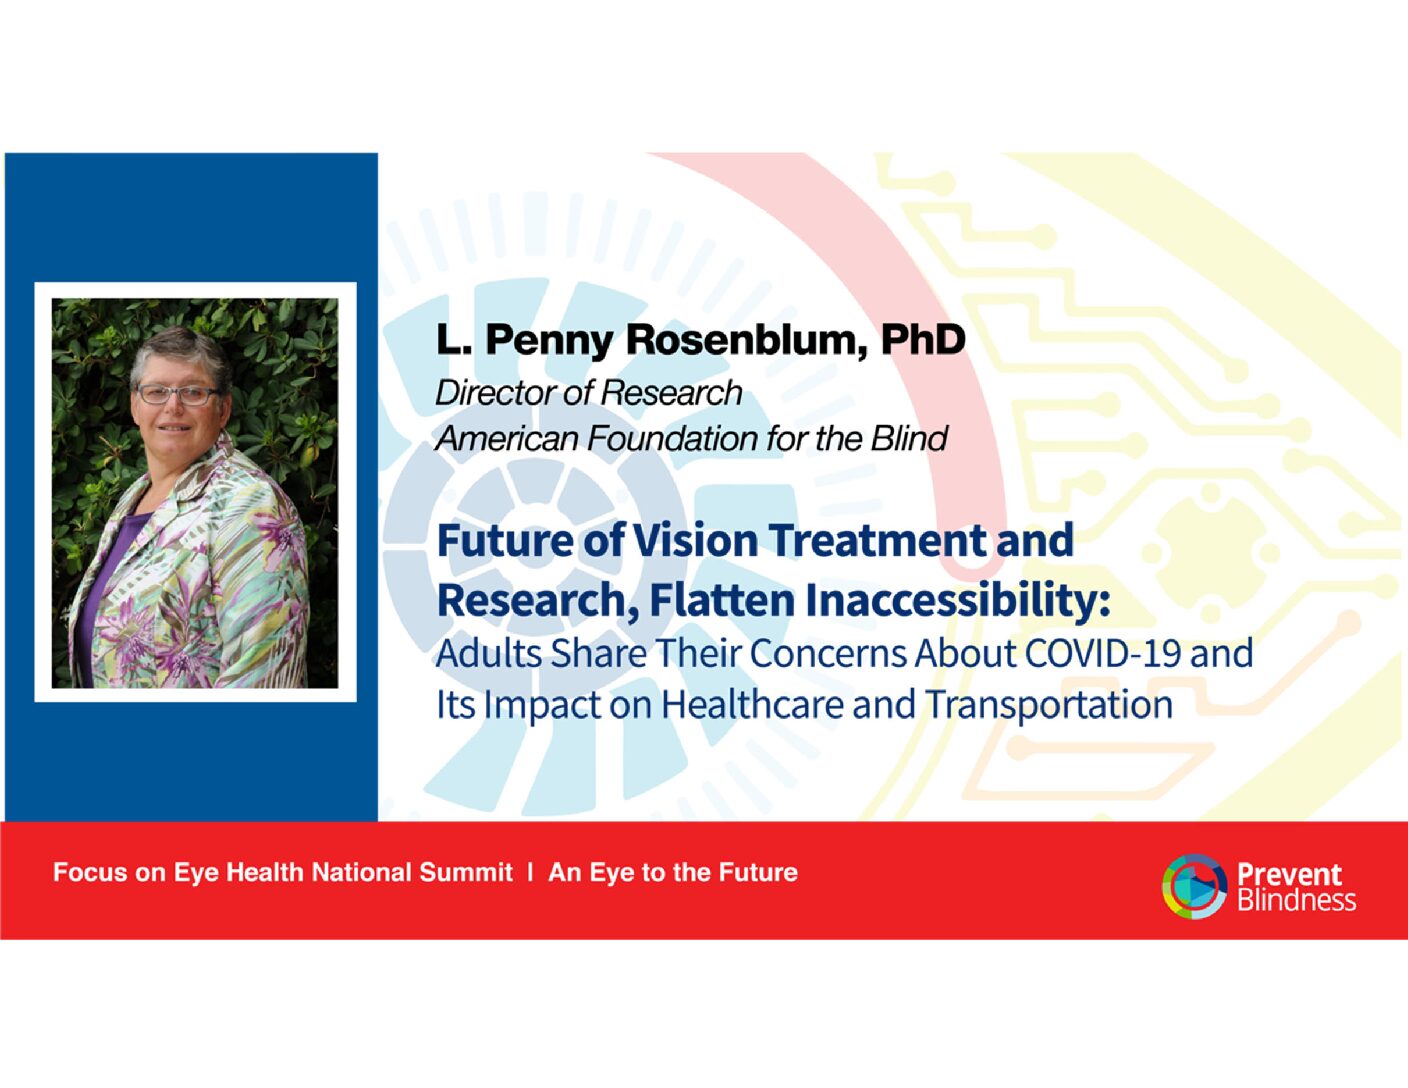 Future of Vision Treatment and Research – Flatten Inaccessibility: Adults Share Their Concerns About COVID-19 and Its Impact on Healthcare and Transportation